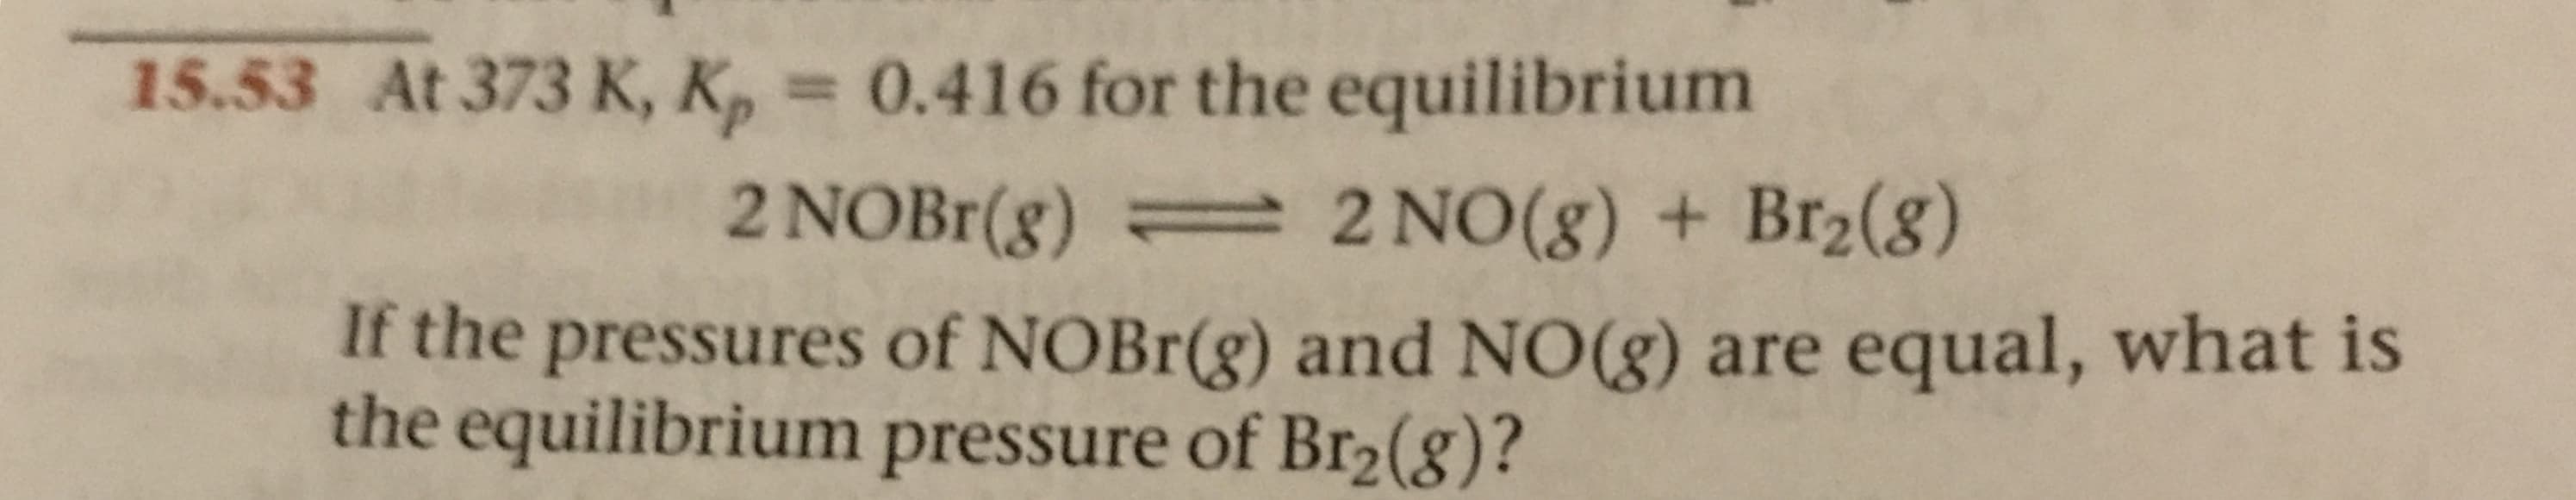 15.53 At 373 K, K, = 0.416 for the equilibrium
2 NOBR(g)
2 NO(g) + Br2(8)
If the pressures of NOBR(g) and NO(g) are equal, what is
the equilibrium pressure of Br2(8)?
